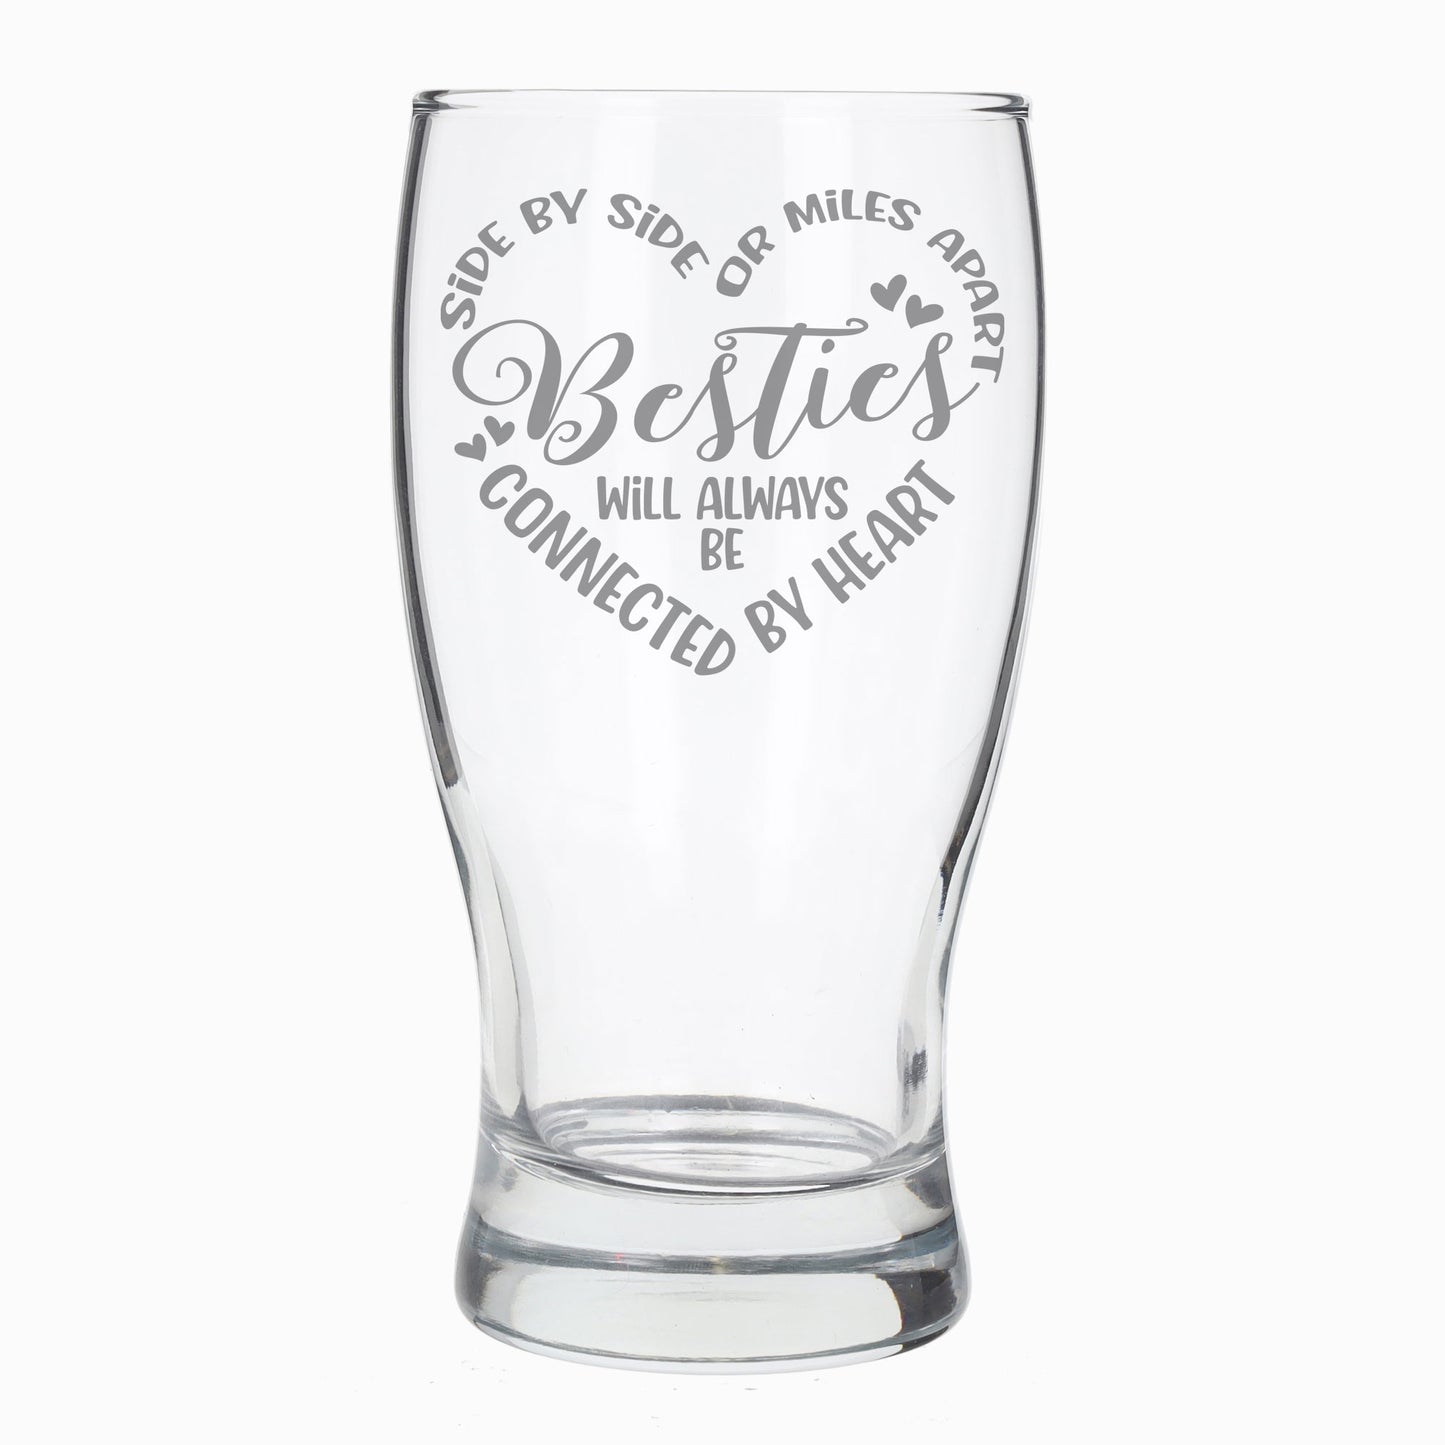 Besties Connected By Heart Engraved Beer Glass and/or Coaster Set  - Always Looking Good -   